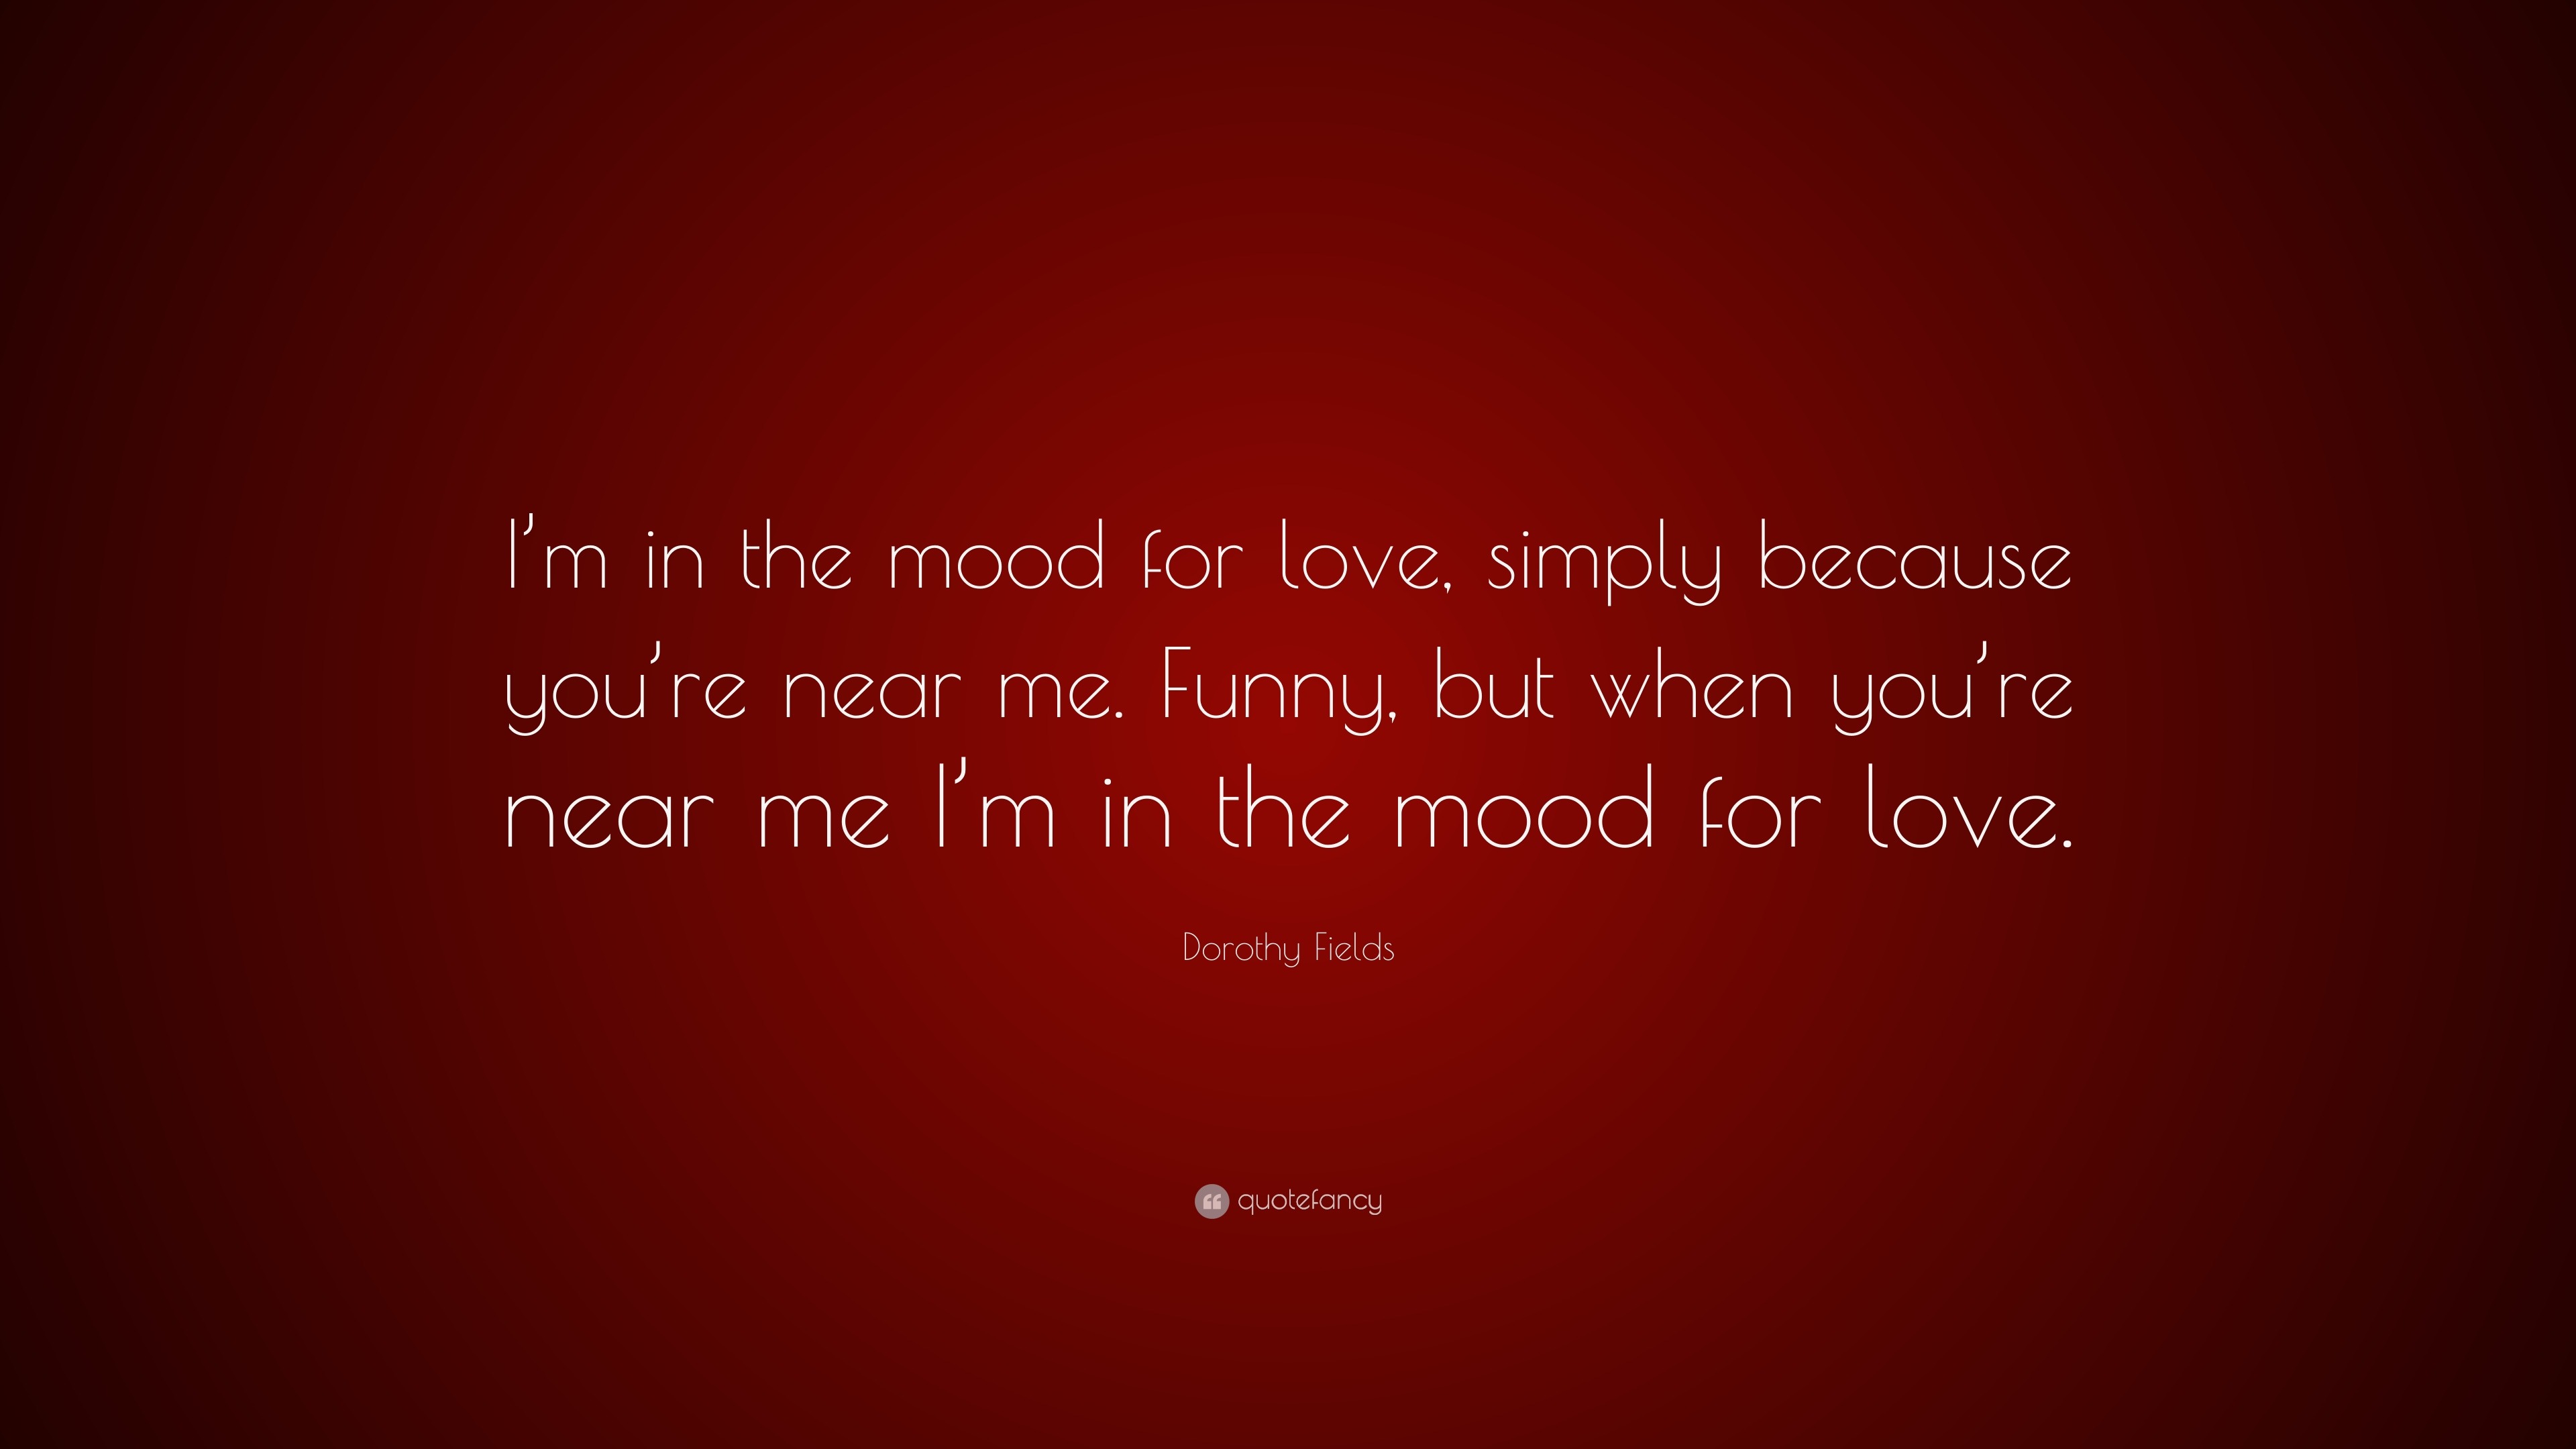 Dorothy Fields quote: I'm in the mood for love, simply because you're near